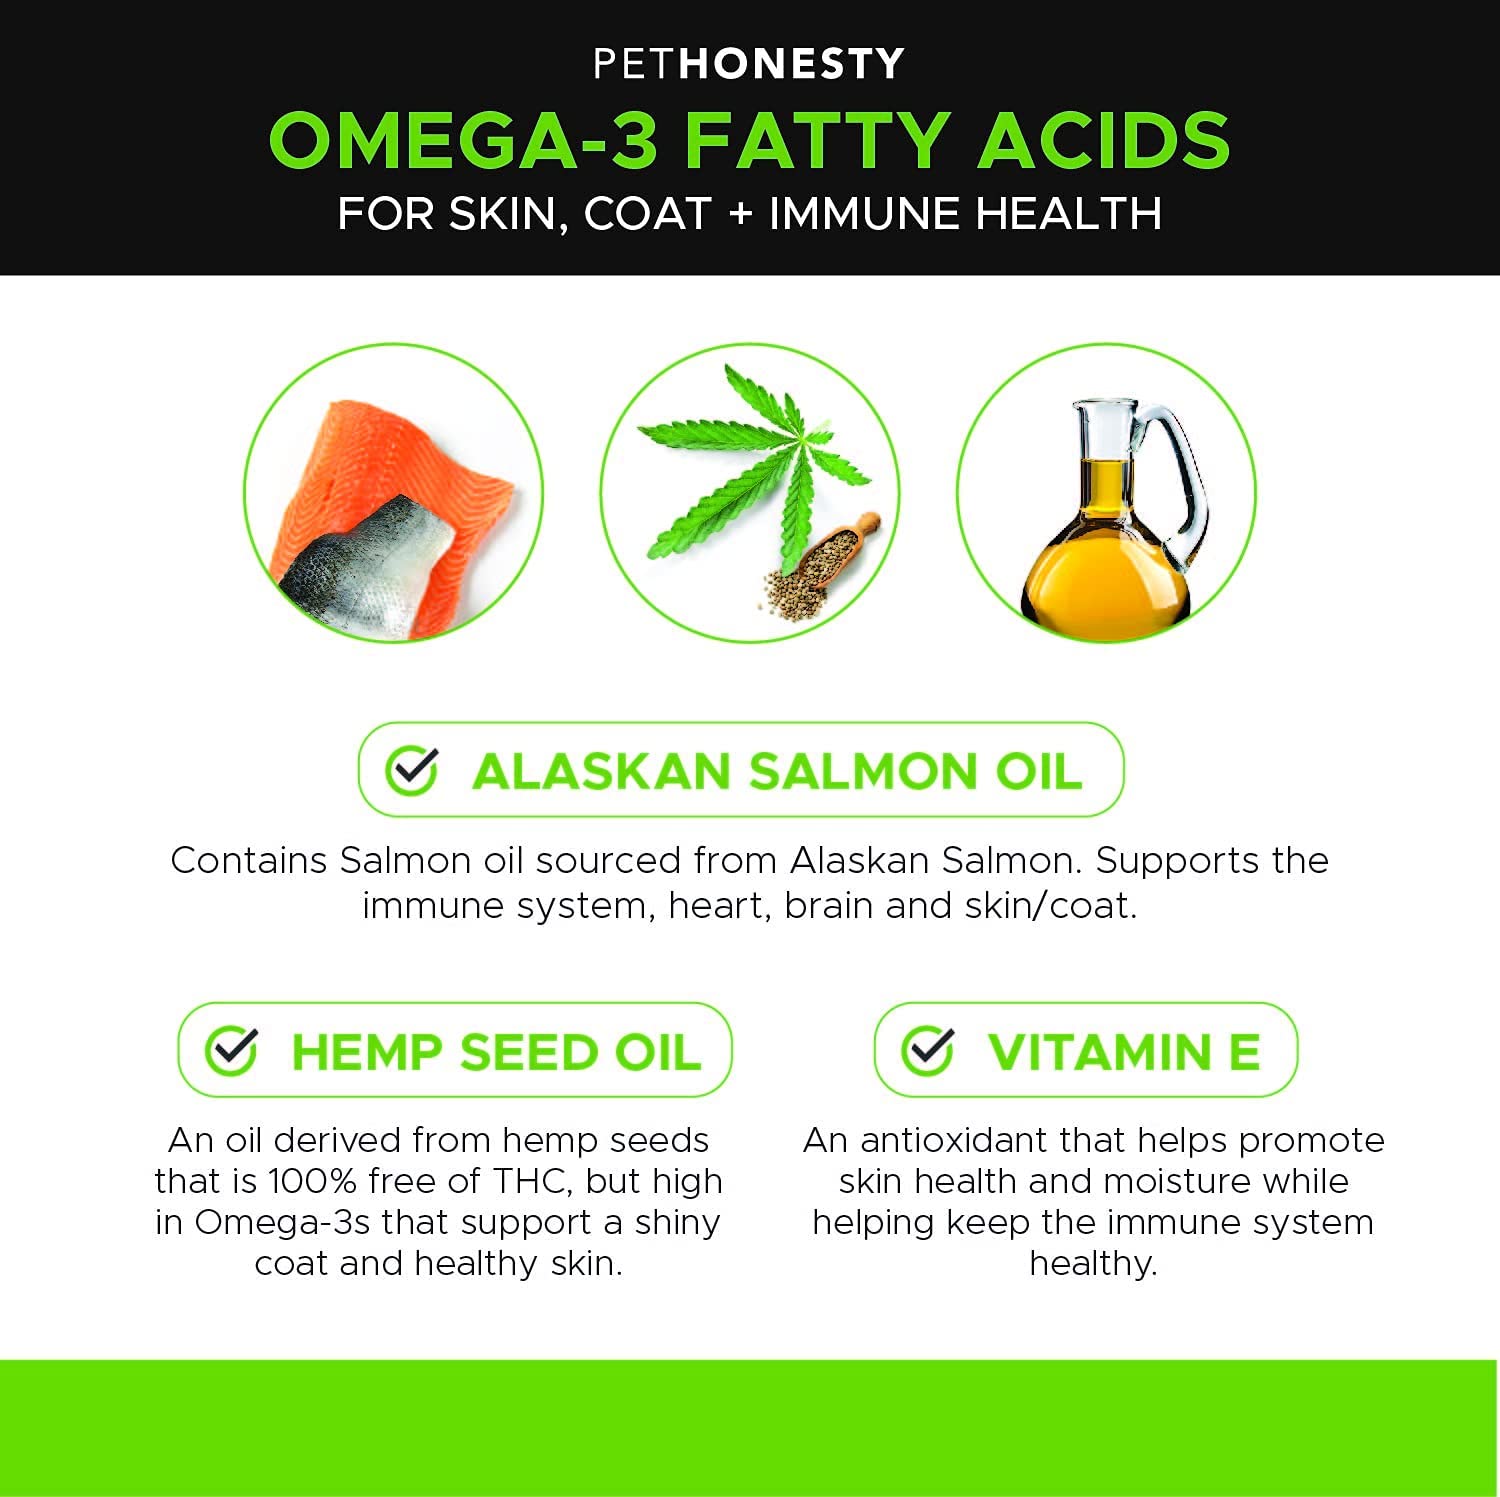 PetHonesty Salmon Oil + Hemp for Dogs & Cats - Wild Alaskan Salmon Oil - Fish Oil, Hemp Oil, Reduce Itching & Dry Skin, Omega-3 for Dogs, DHA for Pets, Joint/Immune Support, 16-oz Bottle Liquid.